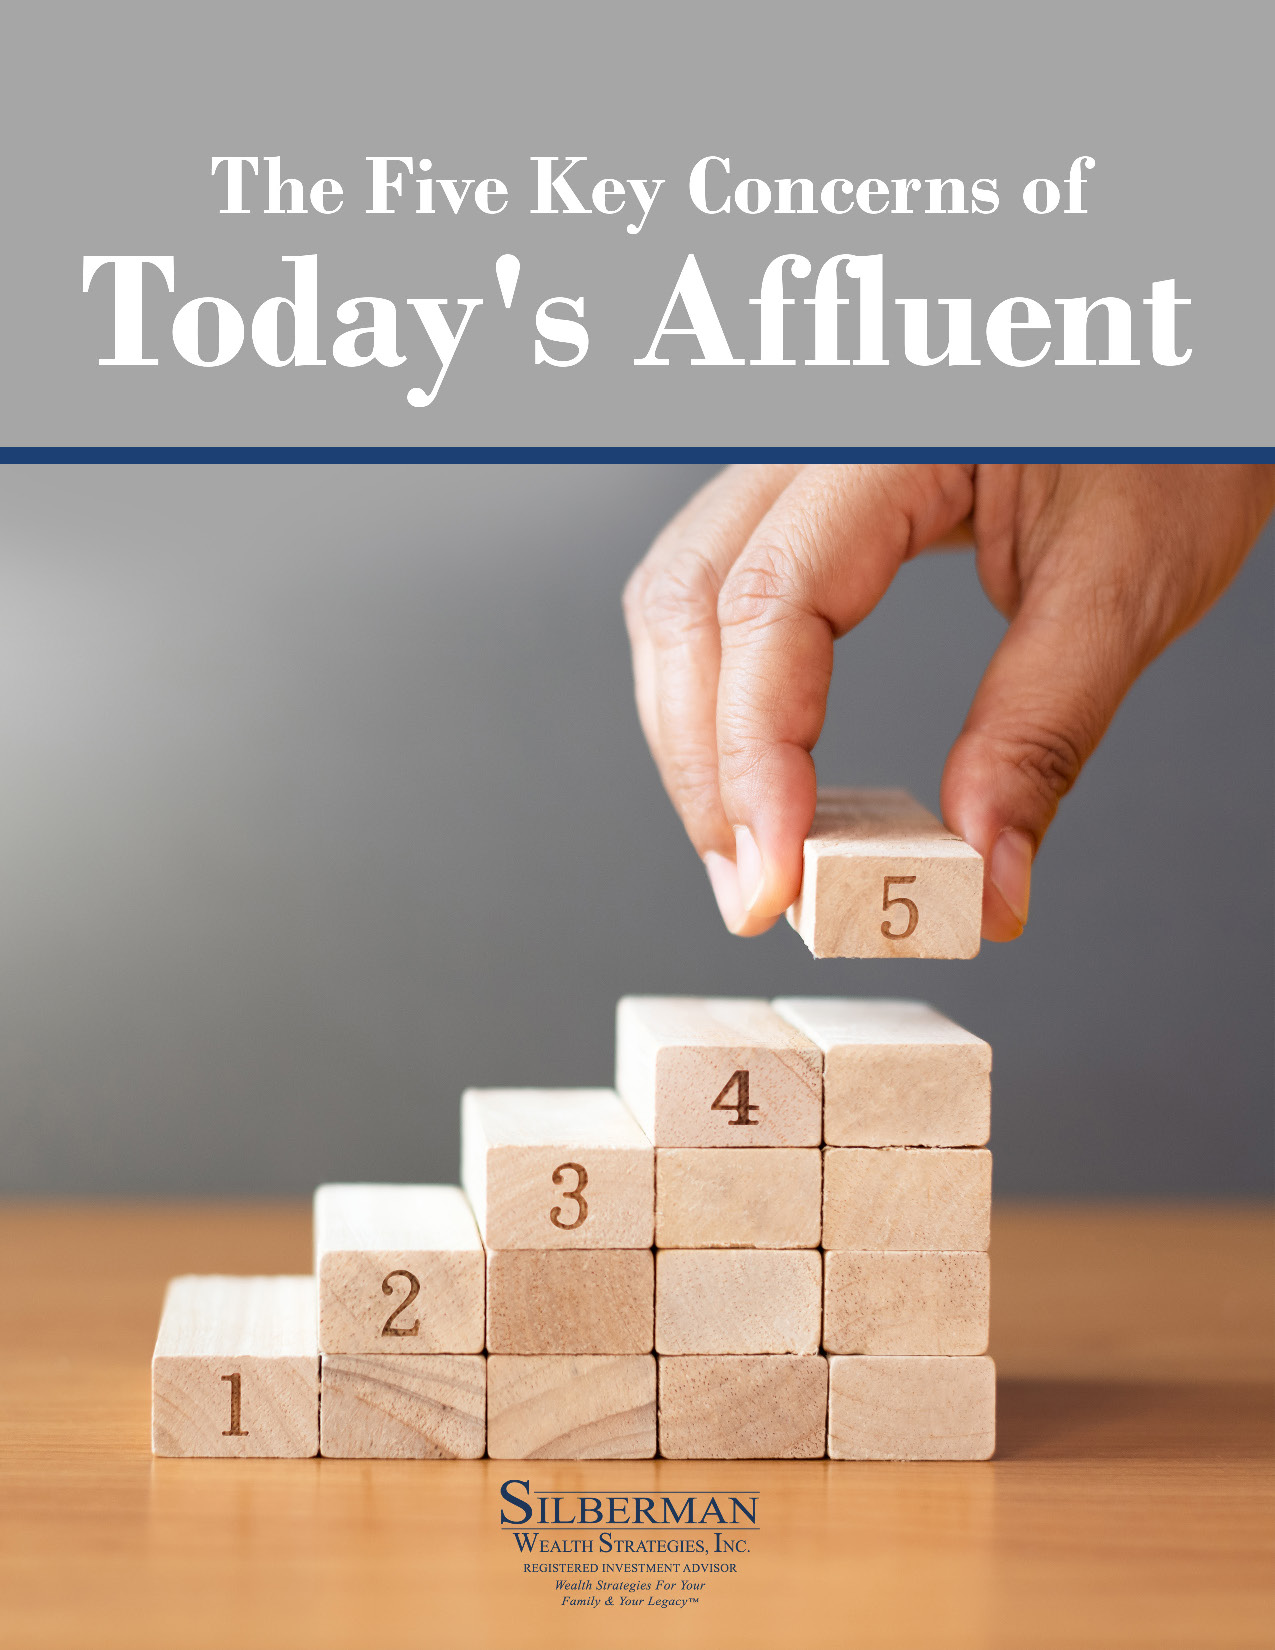 The Five Key Concerns of Today's Affluent - Silberman Wealth Strategies